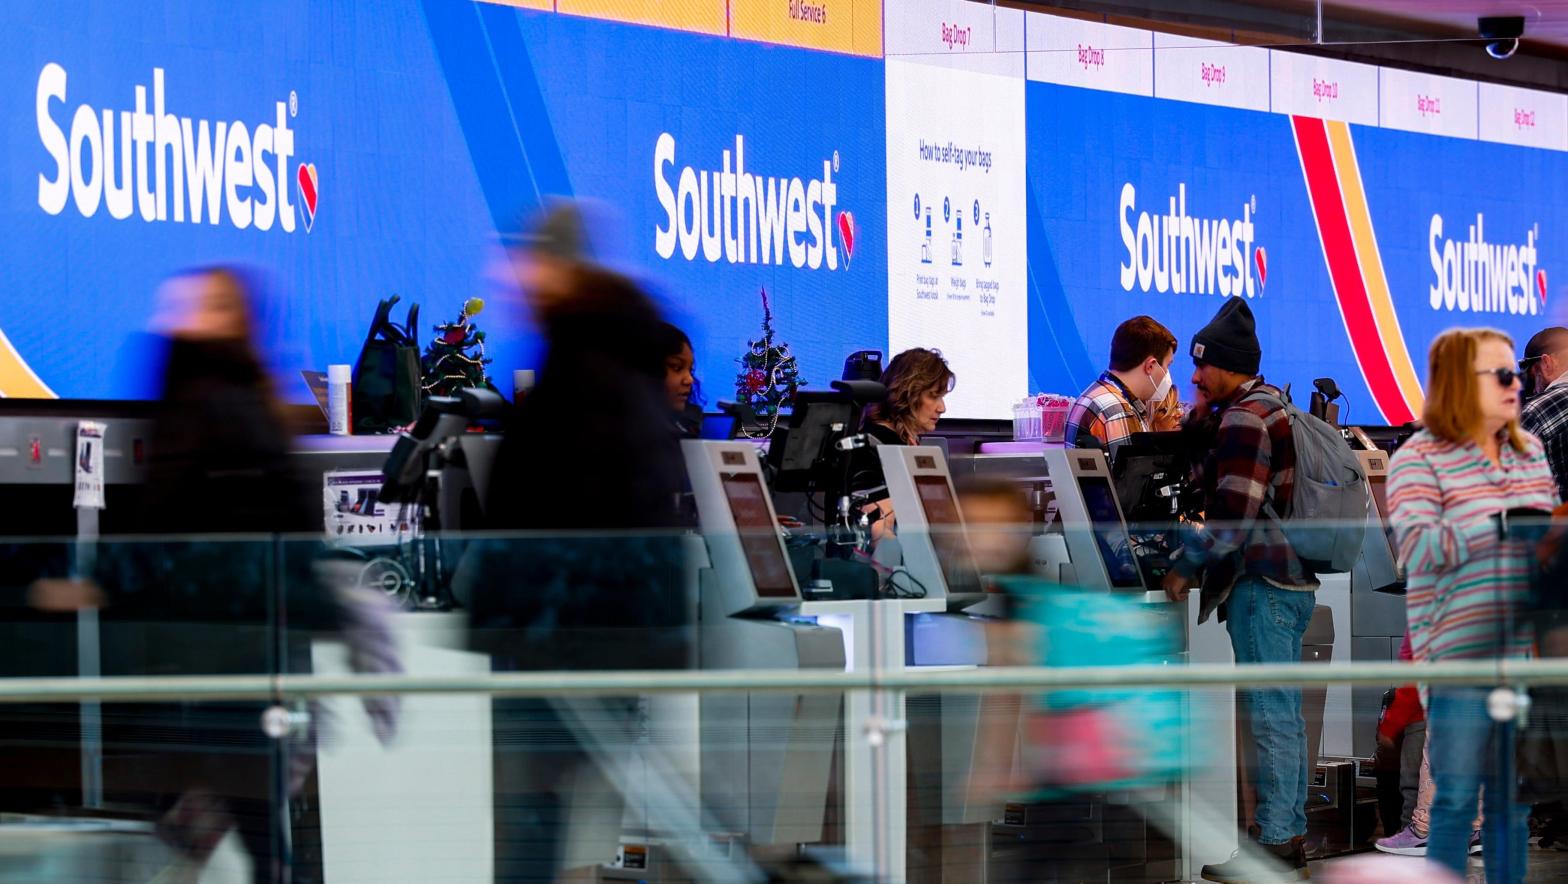 Southwest said a firewall went down Tuesday, causing it to lose connection to some of its data. (Photo: Michael Ciaglo, Getty Images)